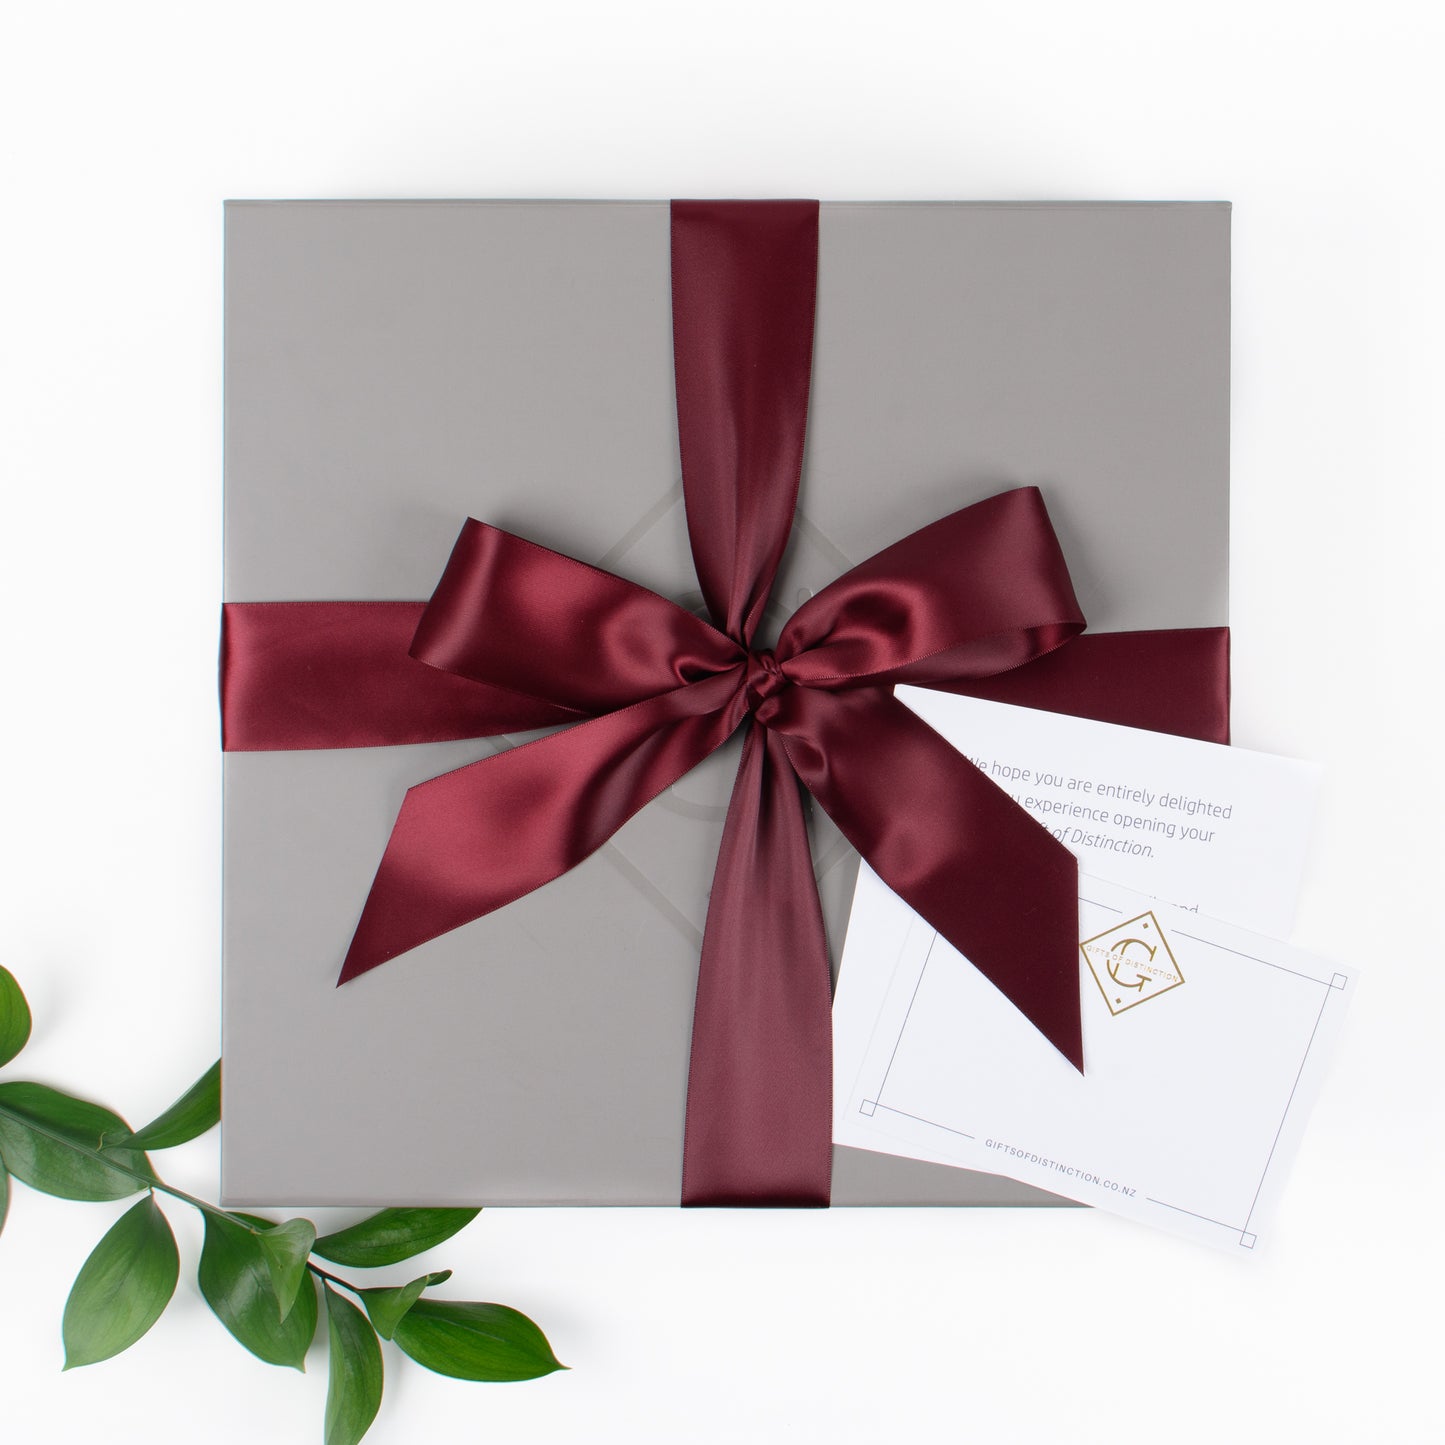 Wellness Elite - Gift Boxes NZ - Gifts of Distinction